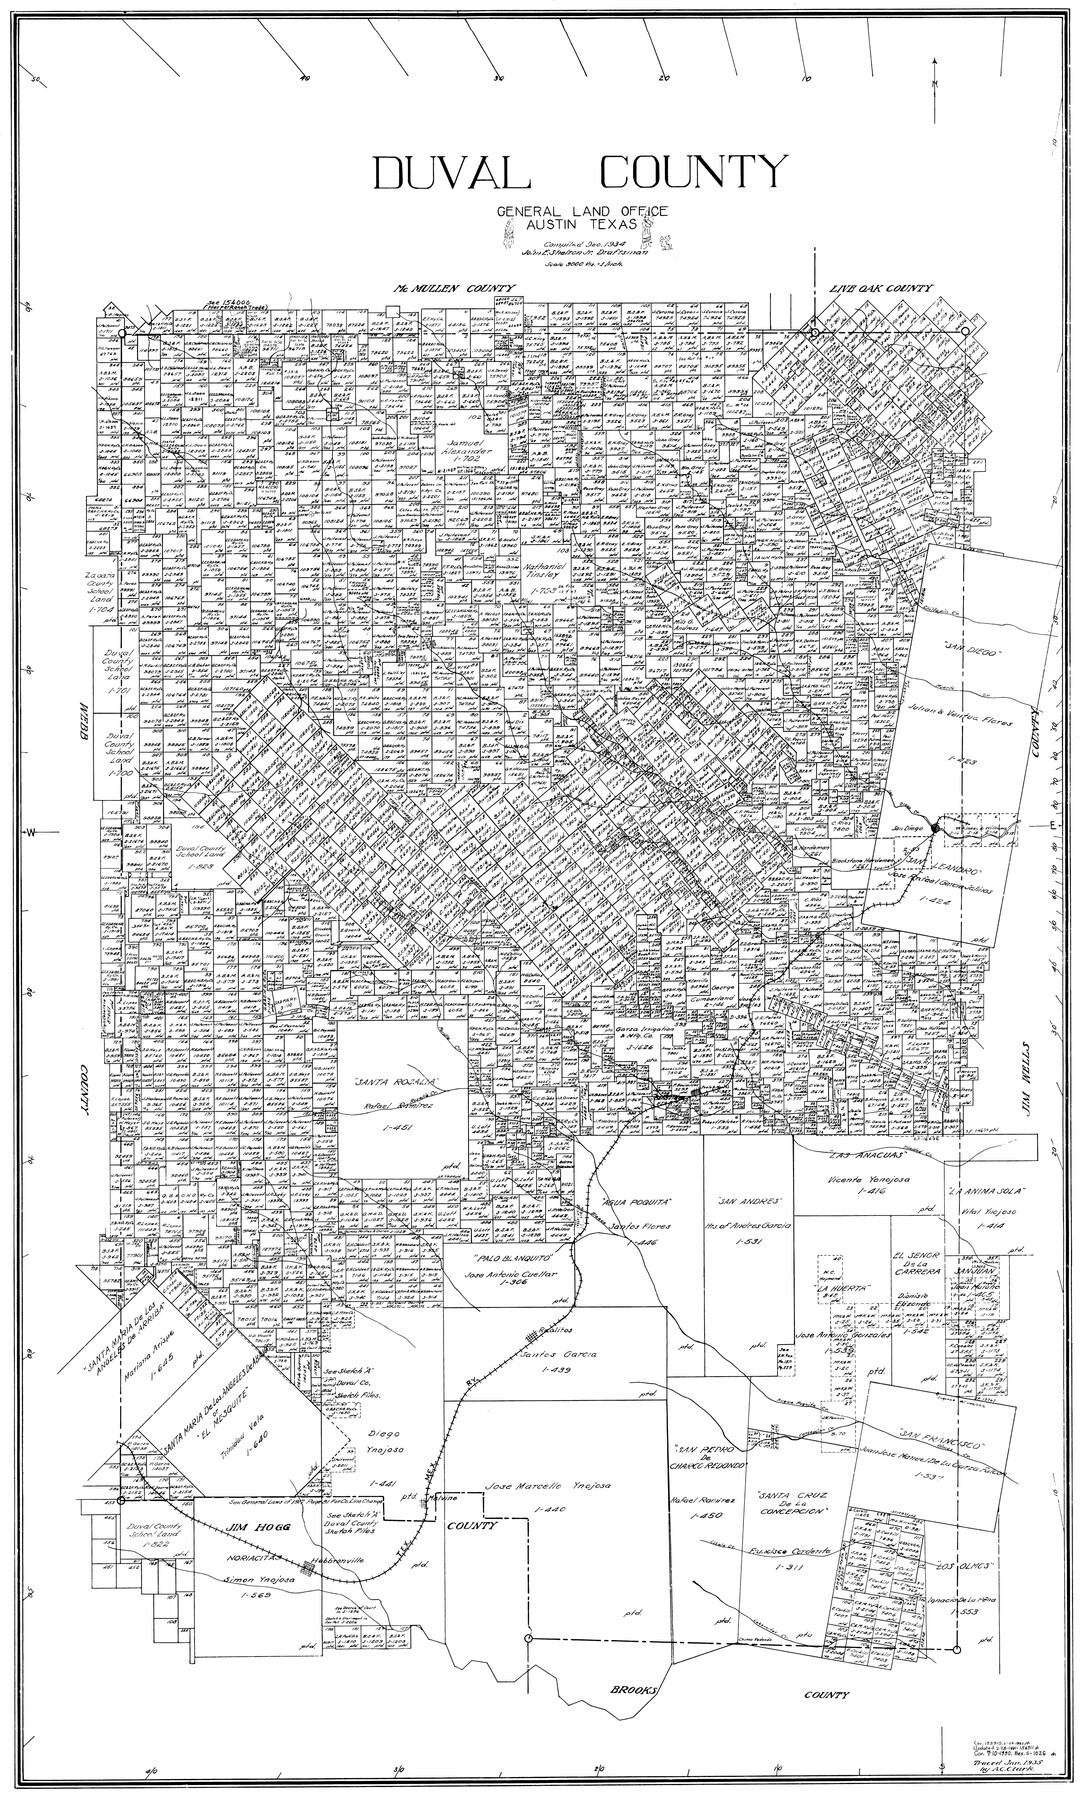 Duval County 77267, Duval County, General Map Collection 77267